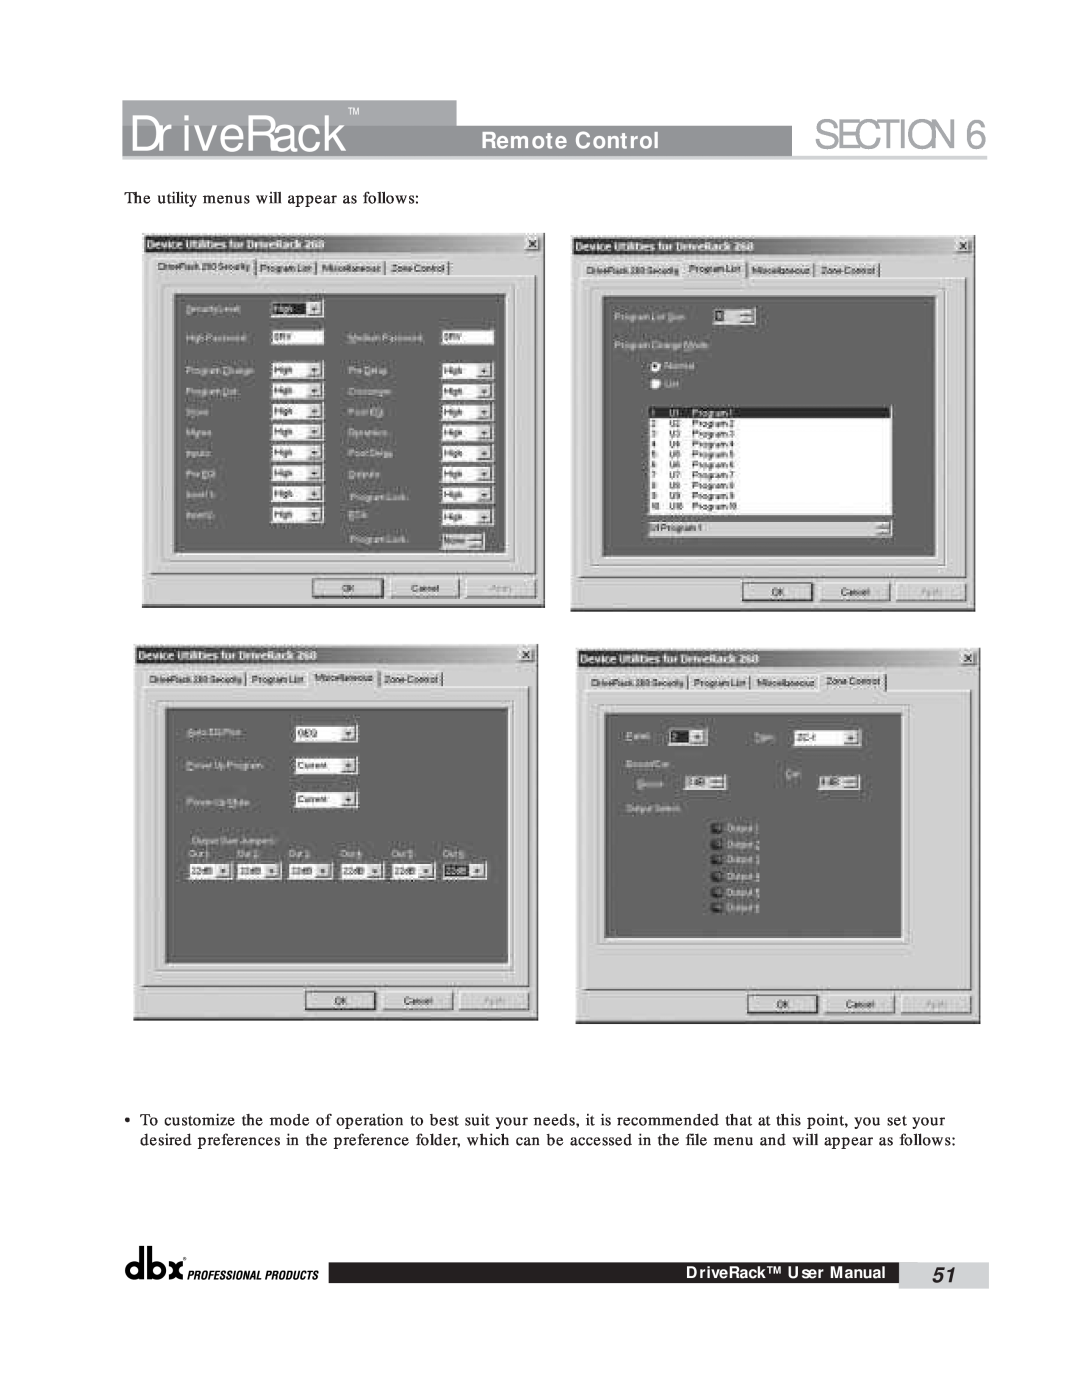 dbx Pro 260 user manual Section, DriveRack, Remote Control, The utility menus will appear as follows 